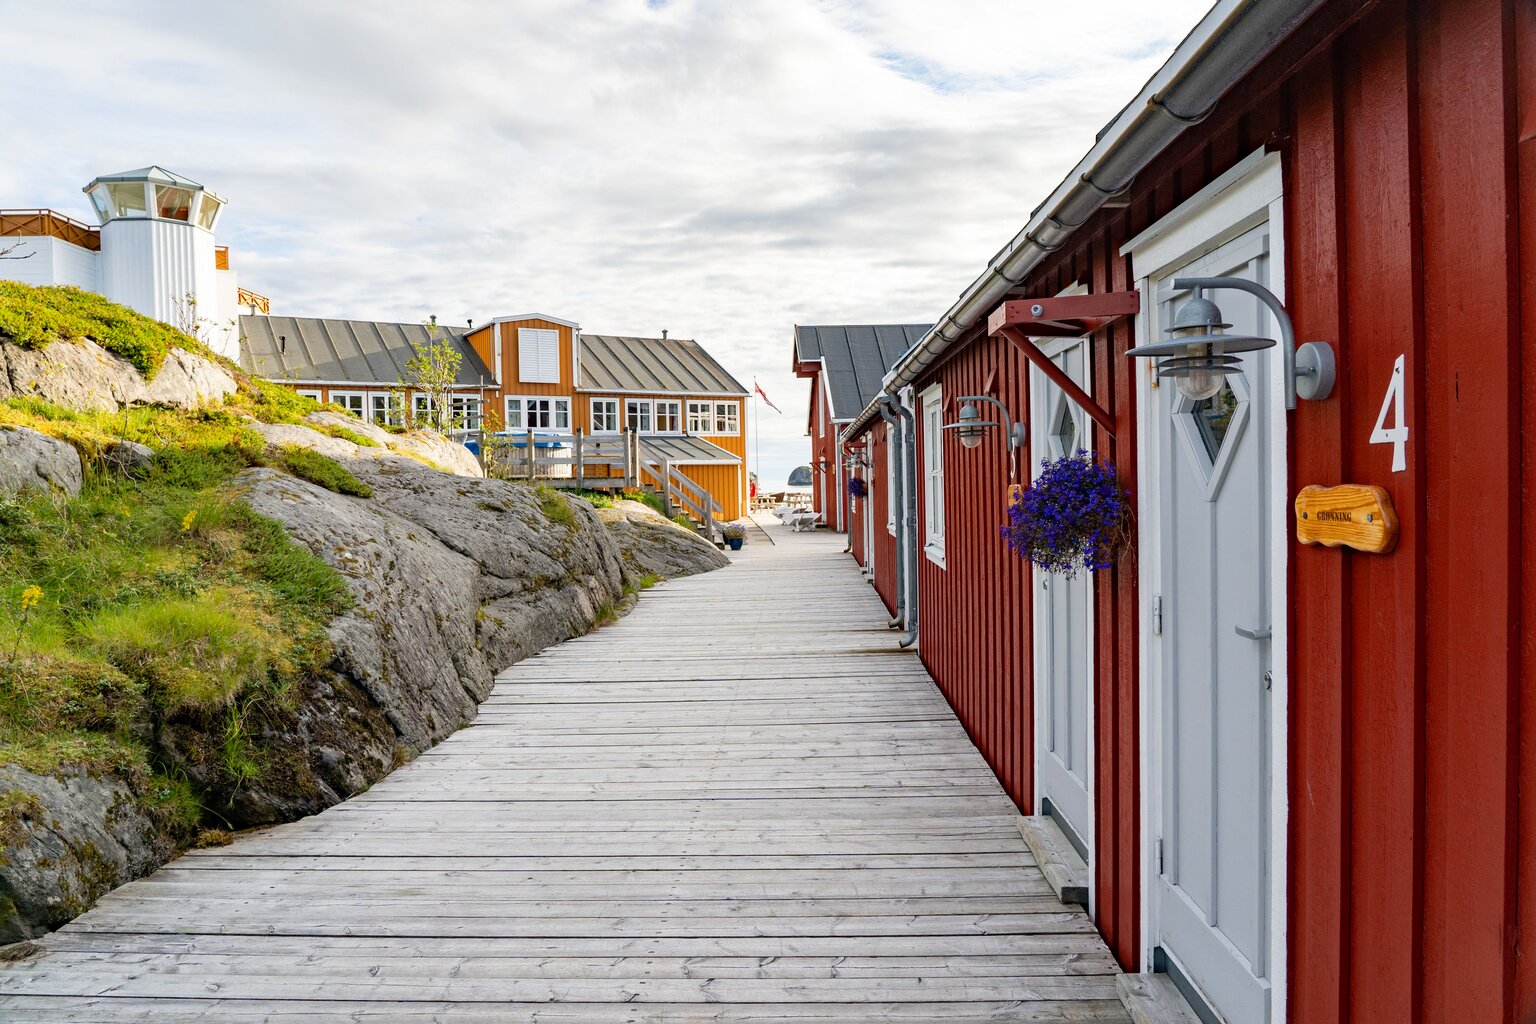 Holidaze featured Home: Cabins in Lofoten - Relax in cozy cabins right by the sea in stunning Lofoten. Wake up to the soothing sound of waves, ready to start your day feeling calm and happy